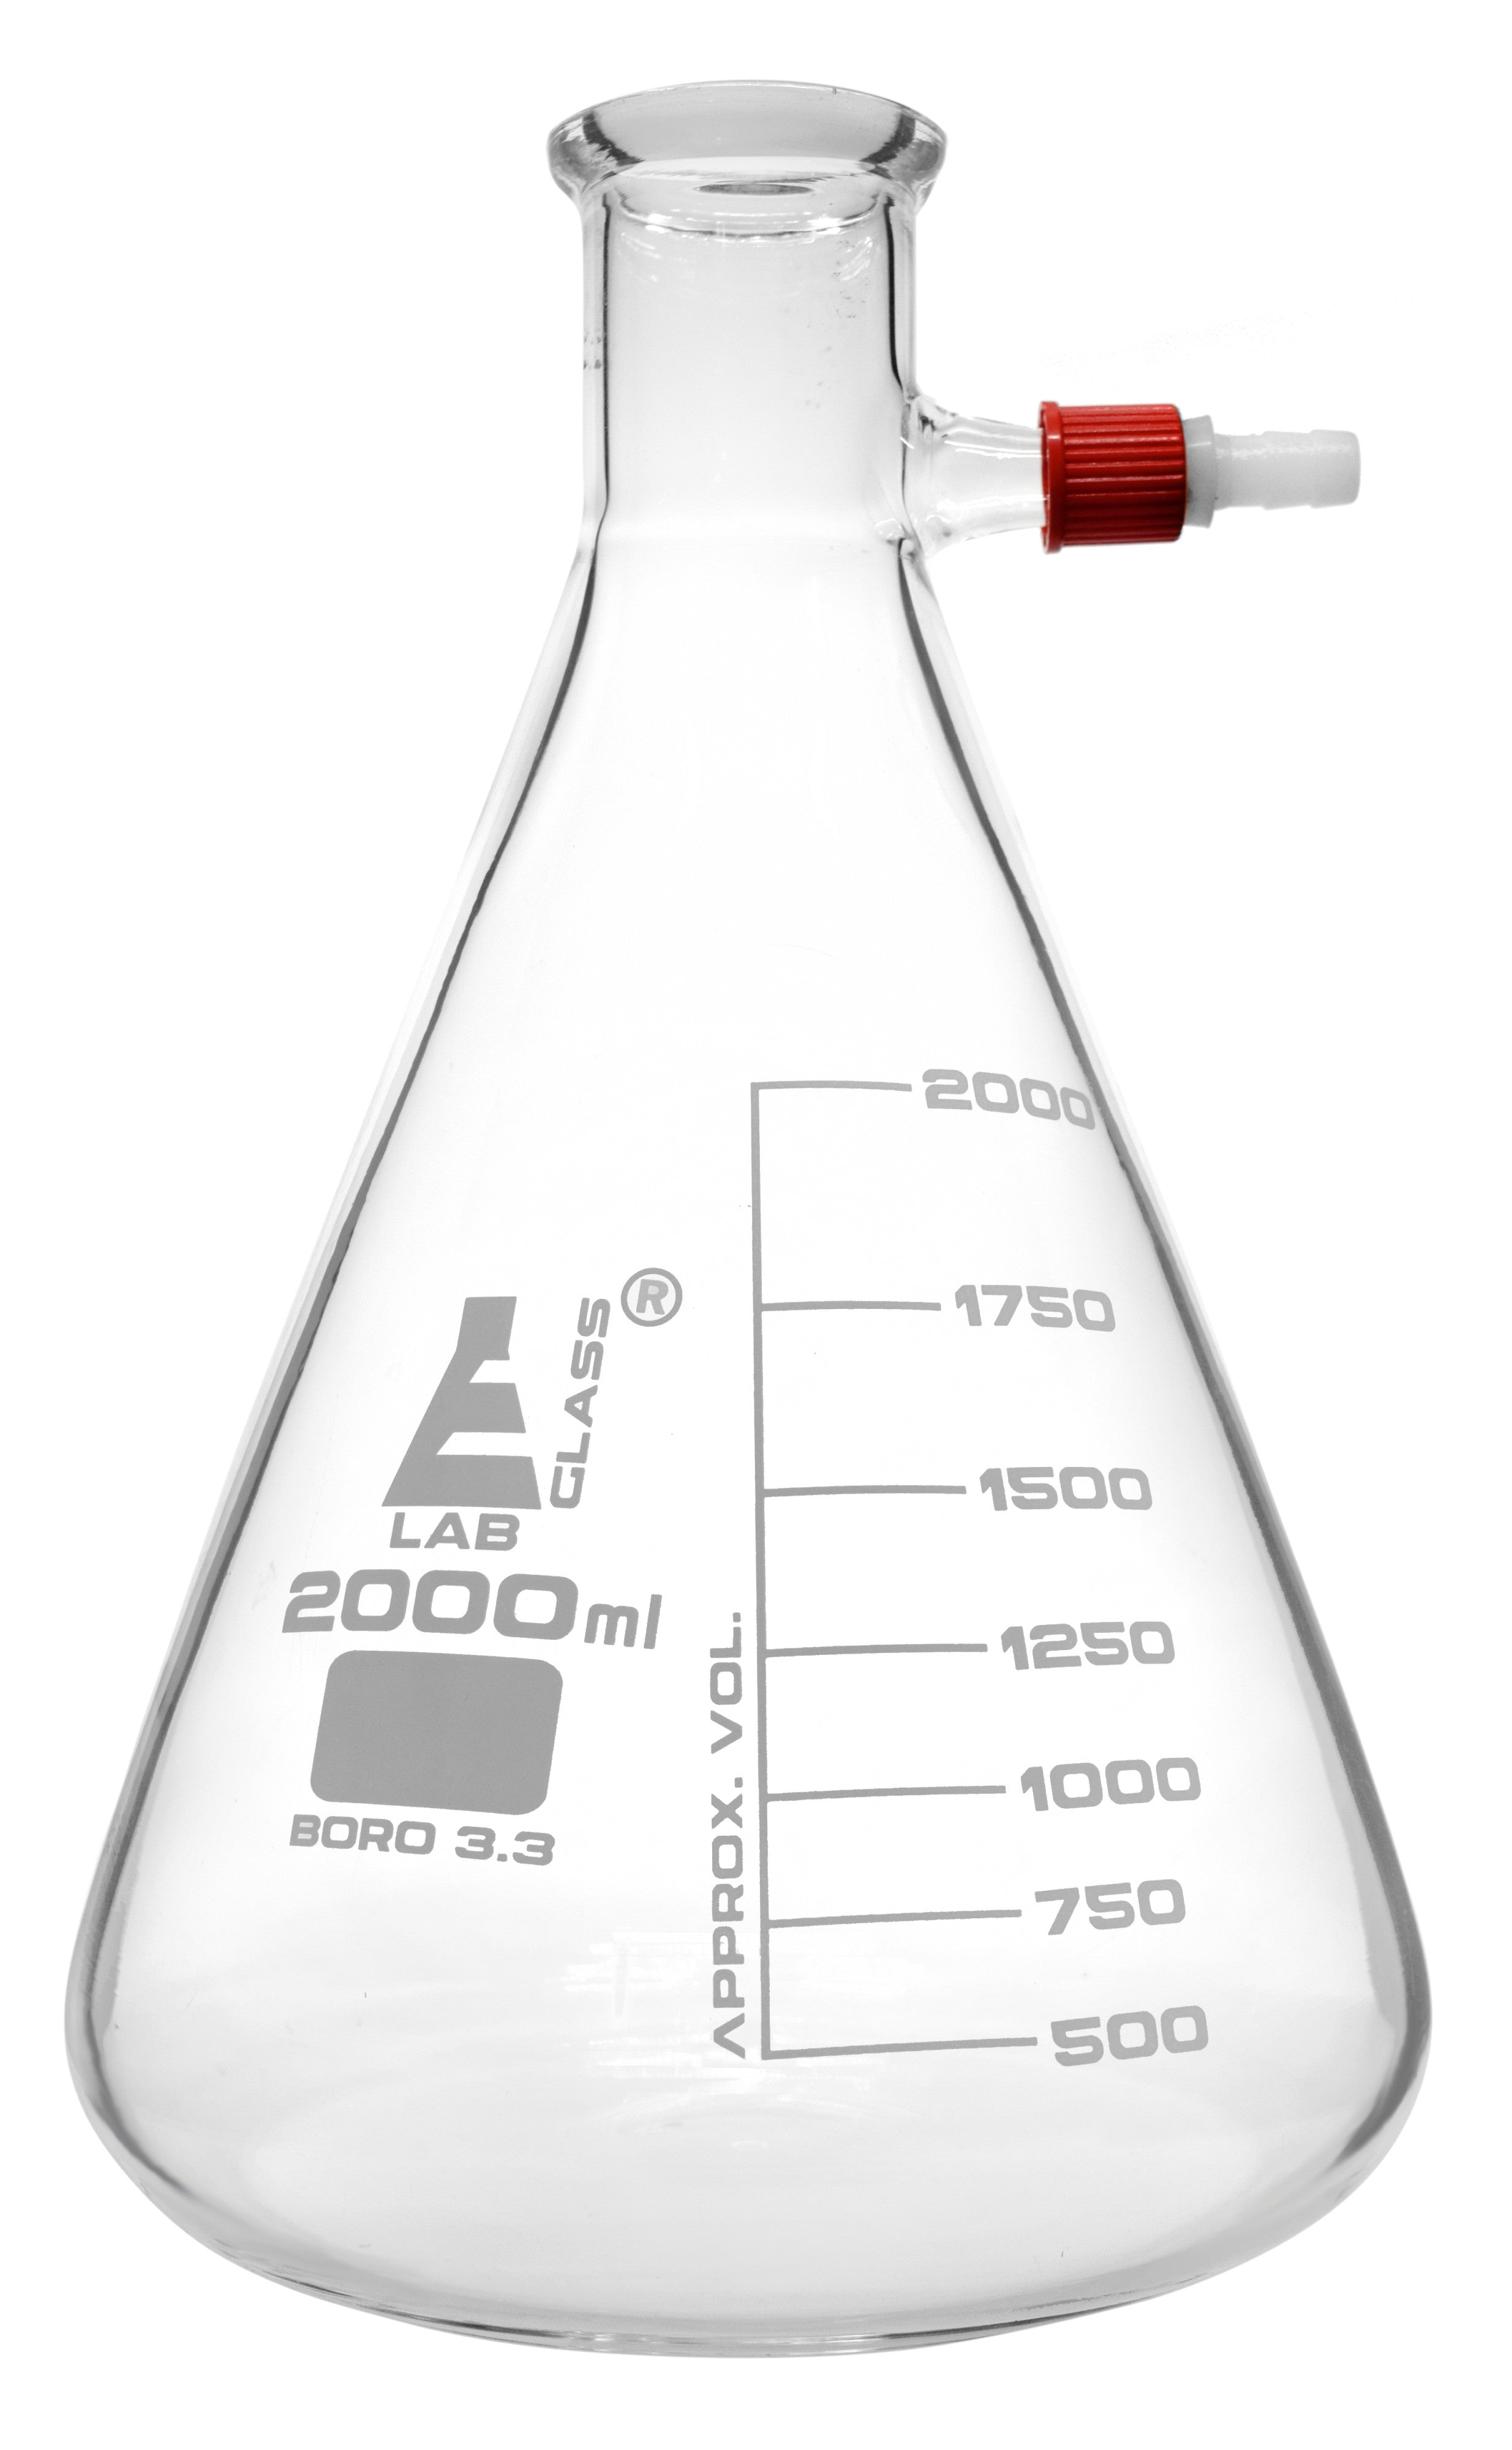 Borosilicate Glass Filtering Flask With Plastic Connector, 2000ml, Graduated, Autoclavable